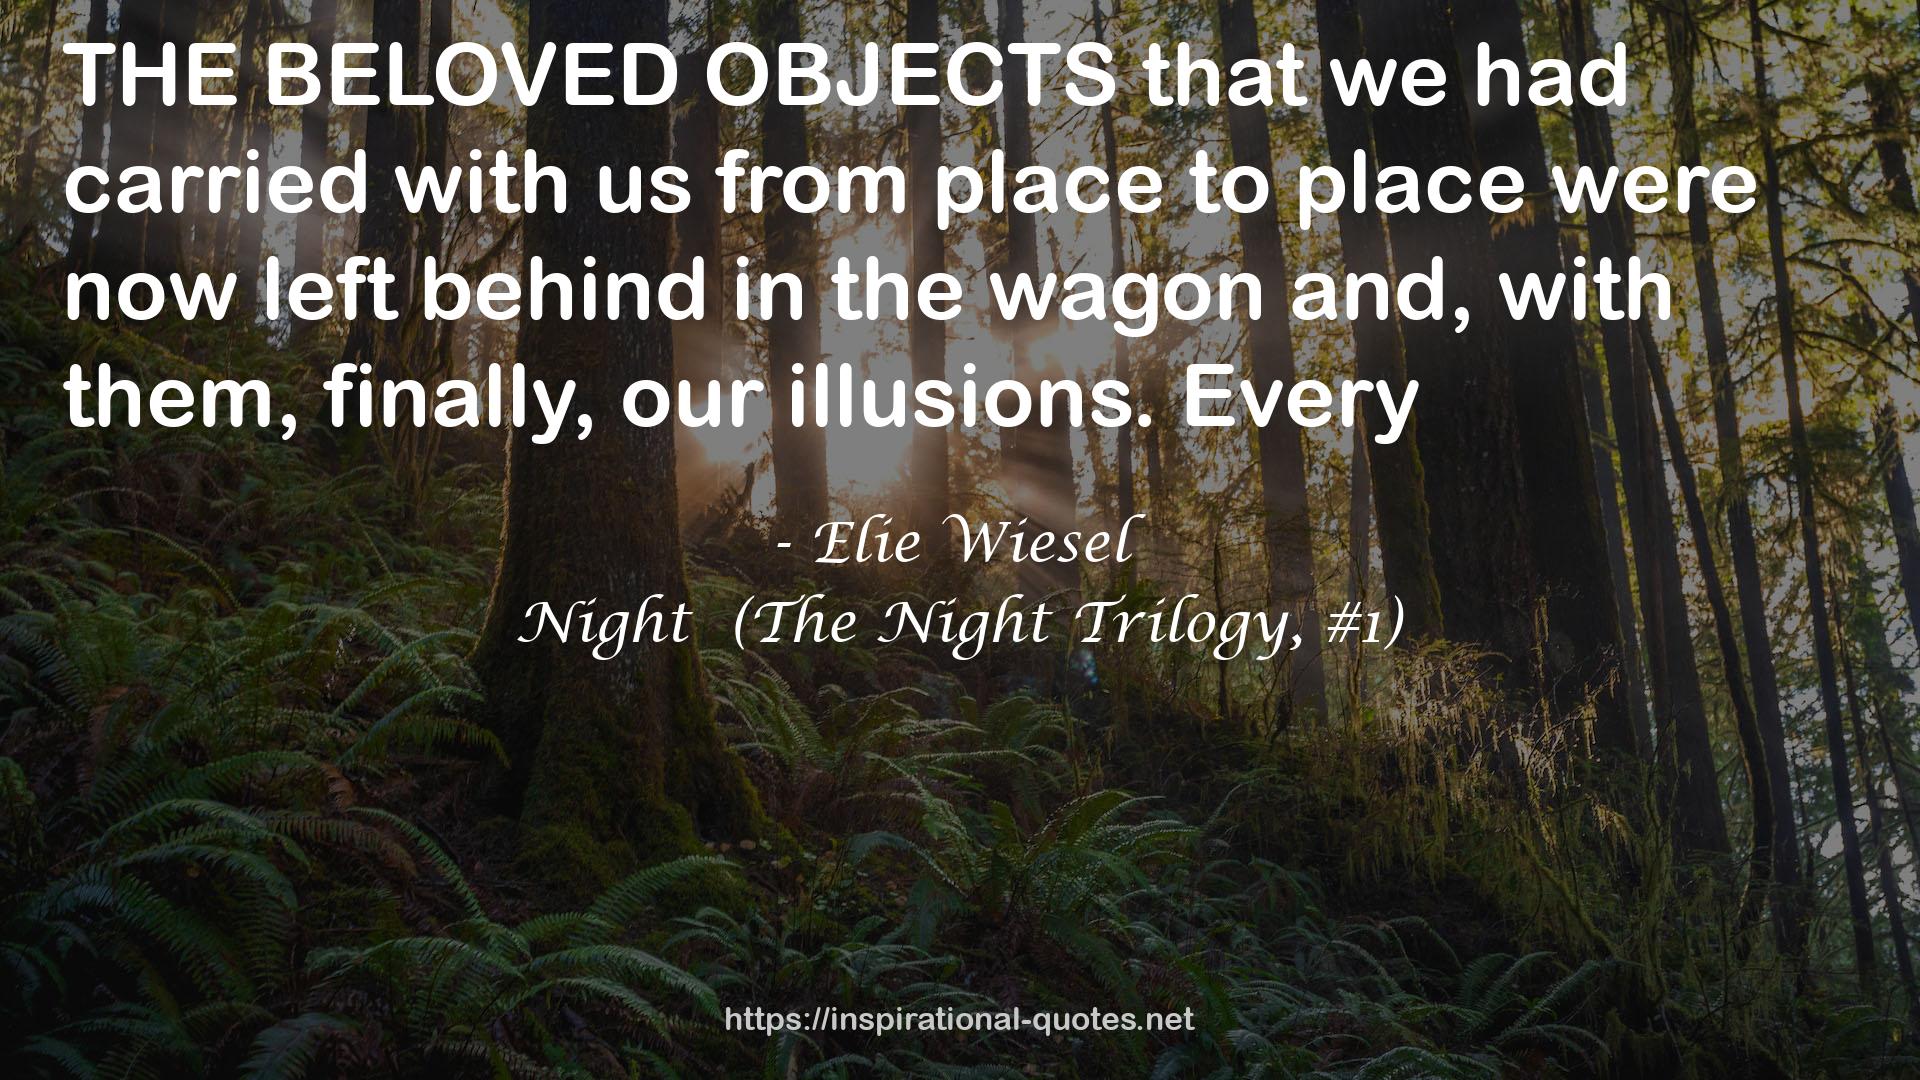 Night  (The Night Trilogy, #1) QUOTES